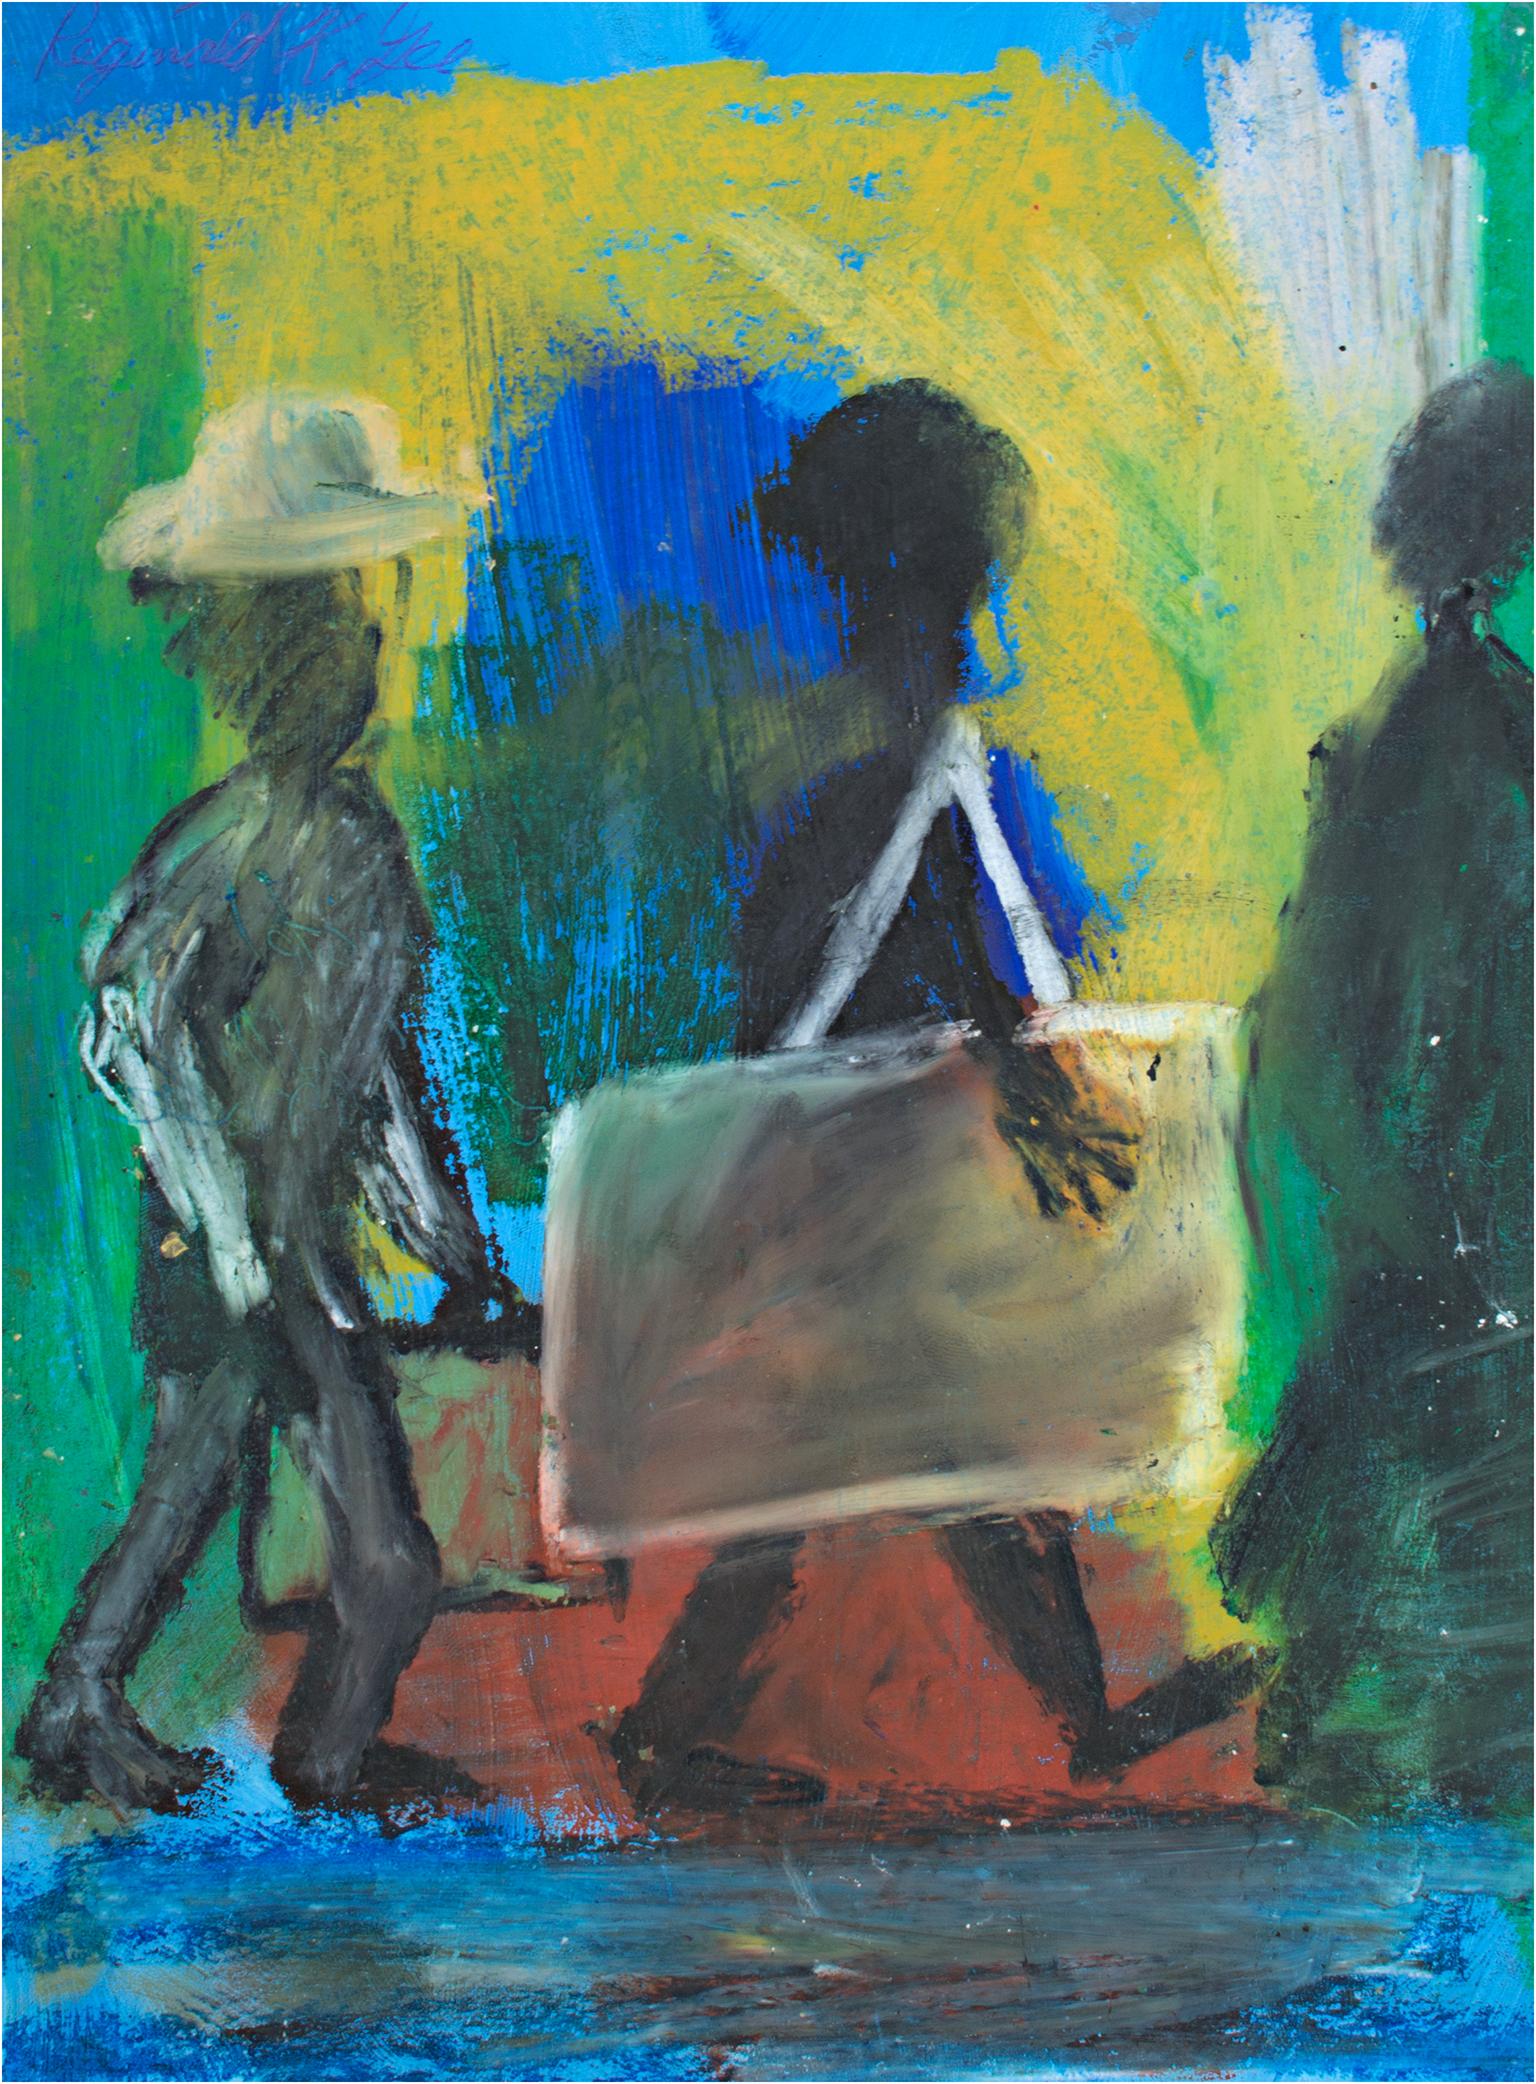 "Walk" is an original oil pastel and acrylic painting on paper by Reginald K. Gee. The artist signed the piece on the back. This piece features a line of three people walking in front of an abstract background. One man carries a large portfolio,